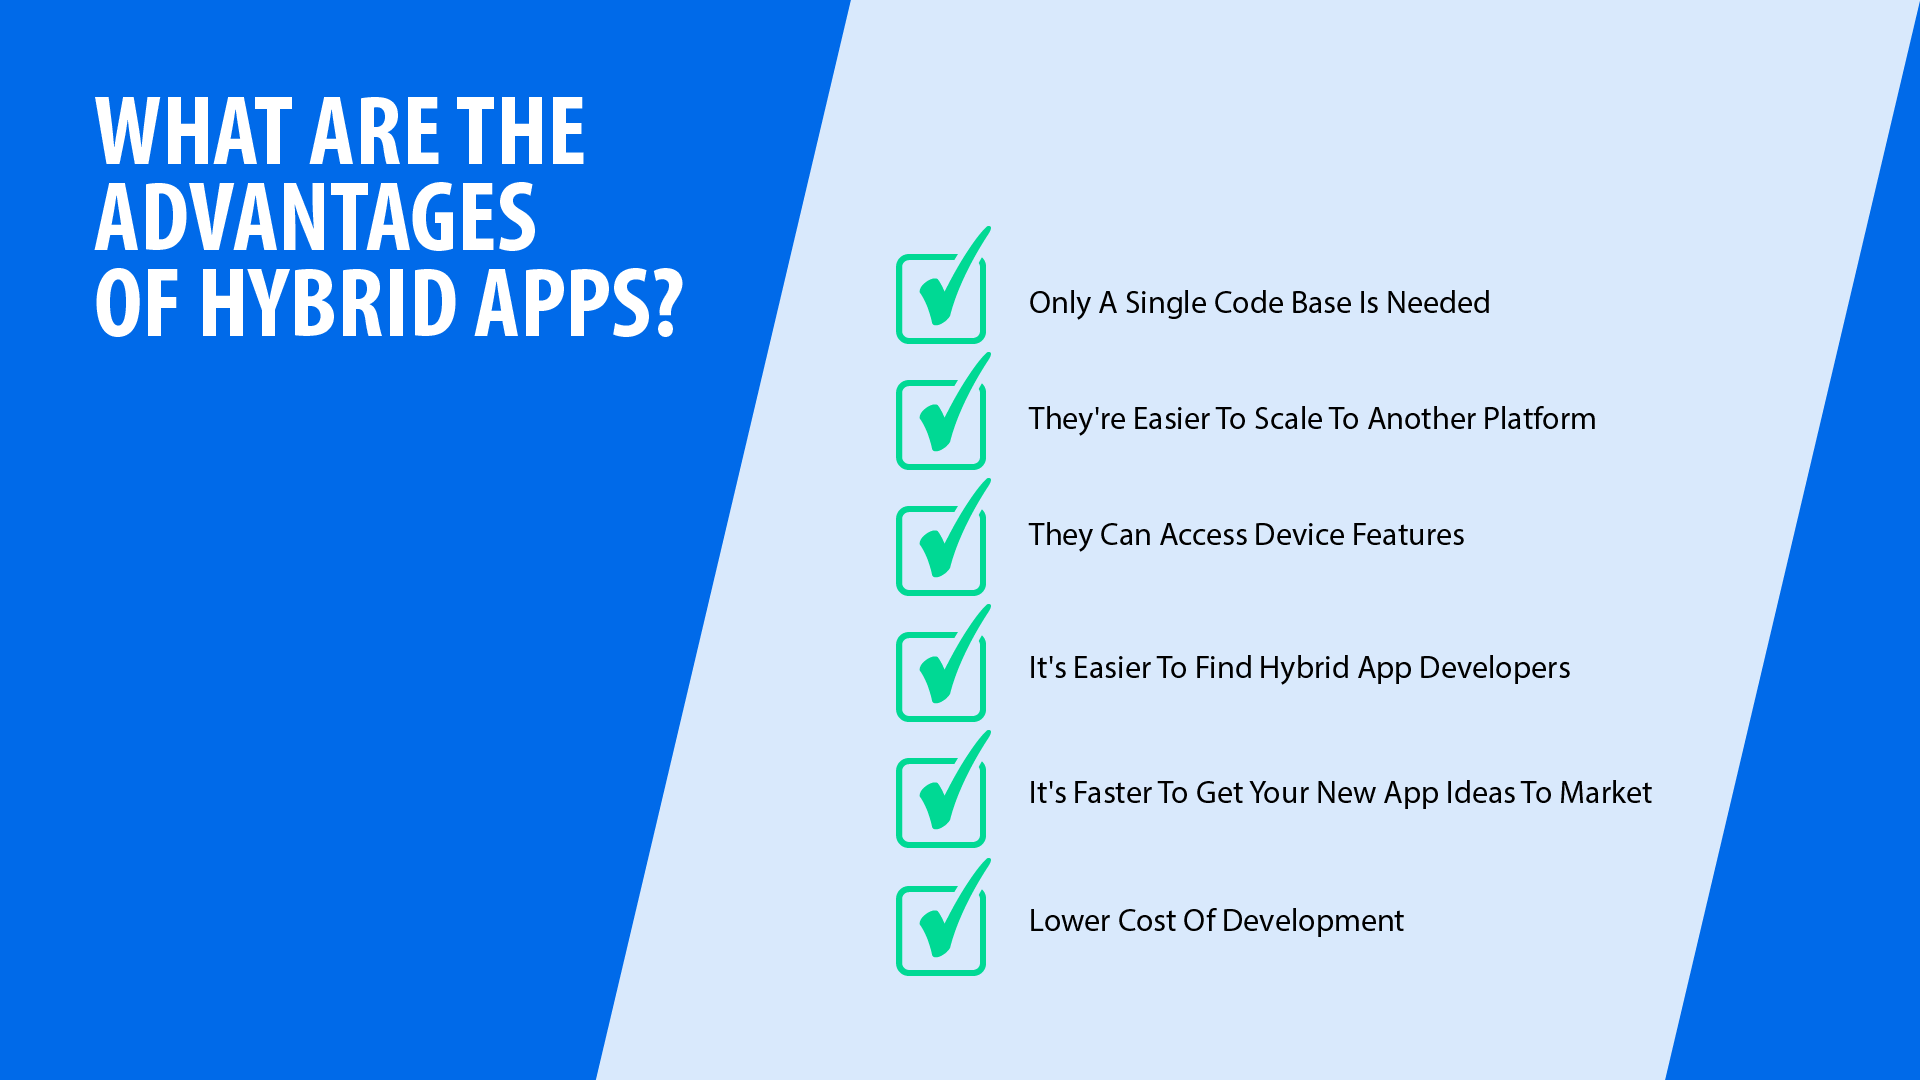 The advantages of Hybrid Apps